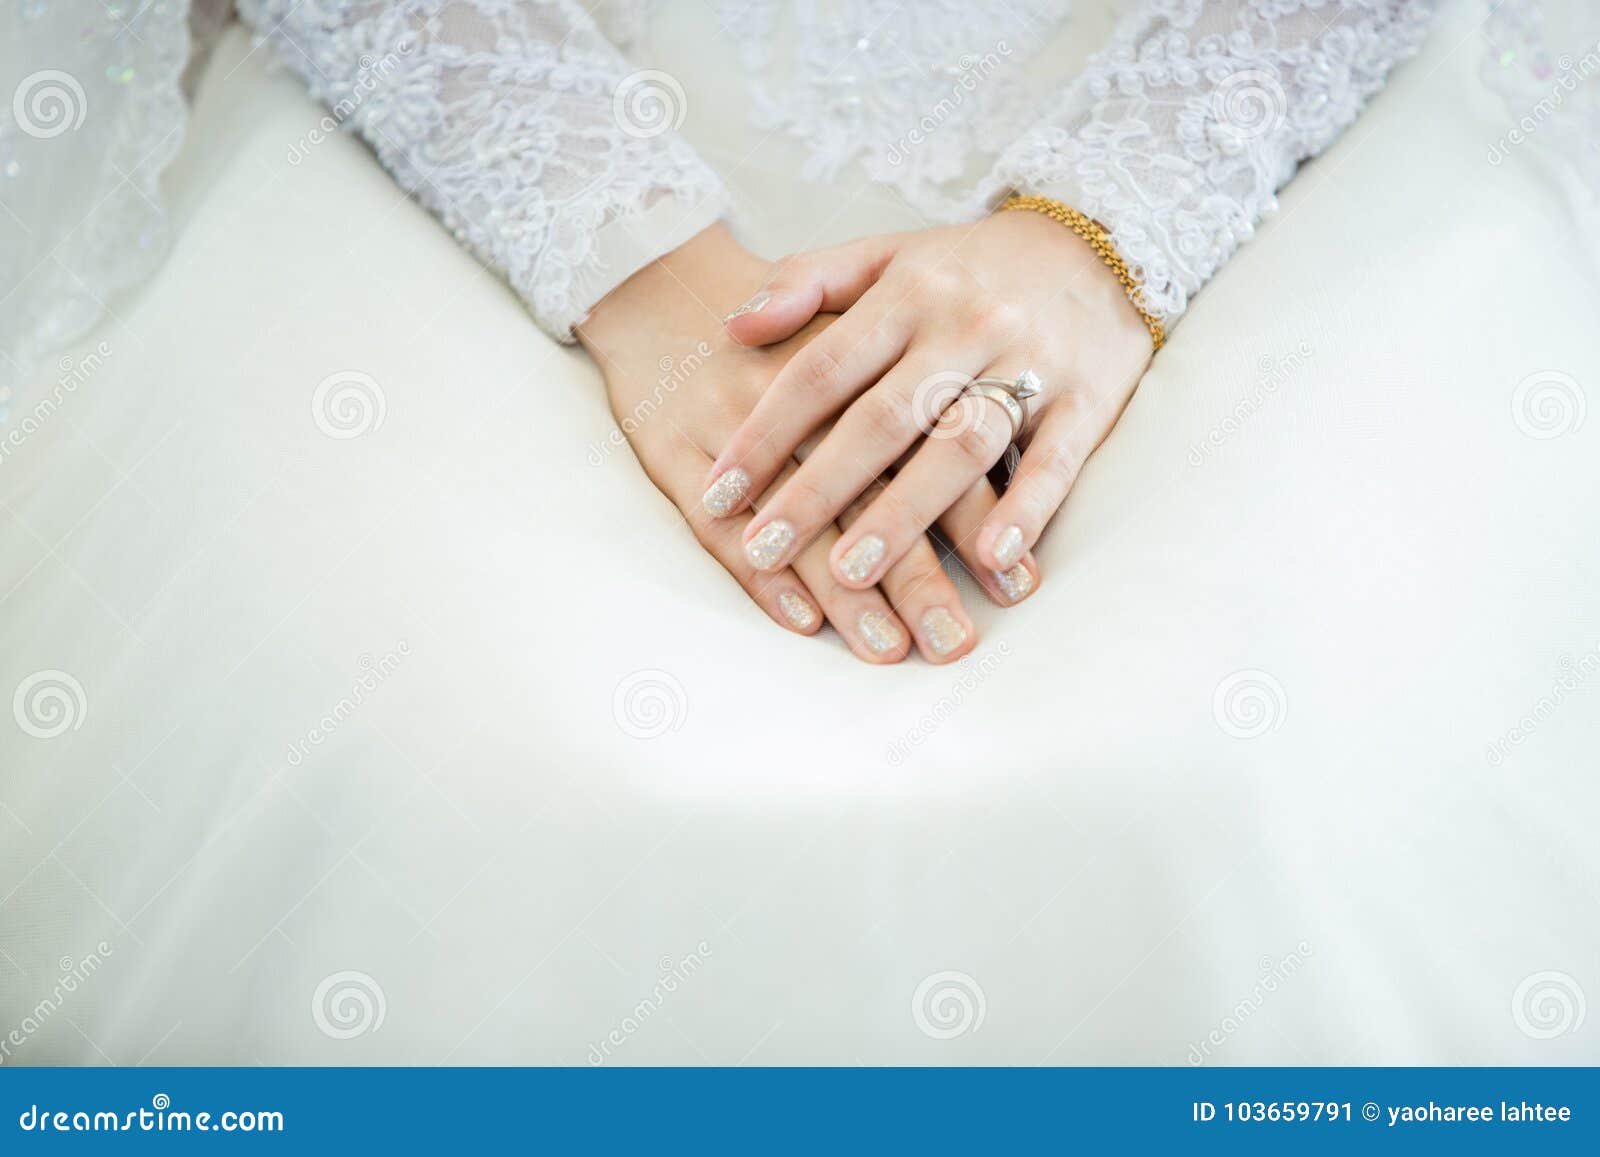 Muslim Bride Hand with Ring Stock Image - Image of culture, dress ...